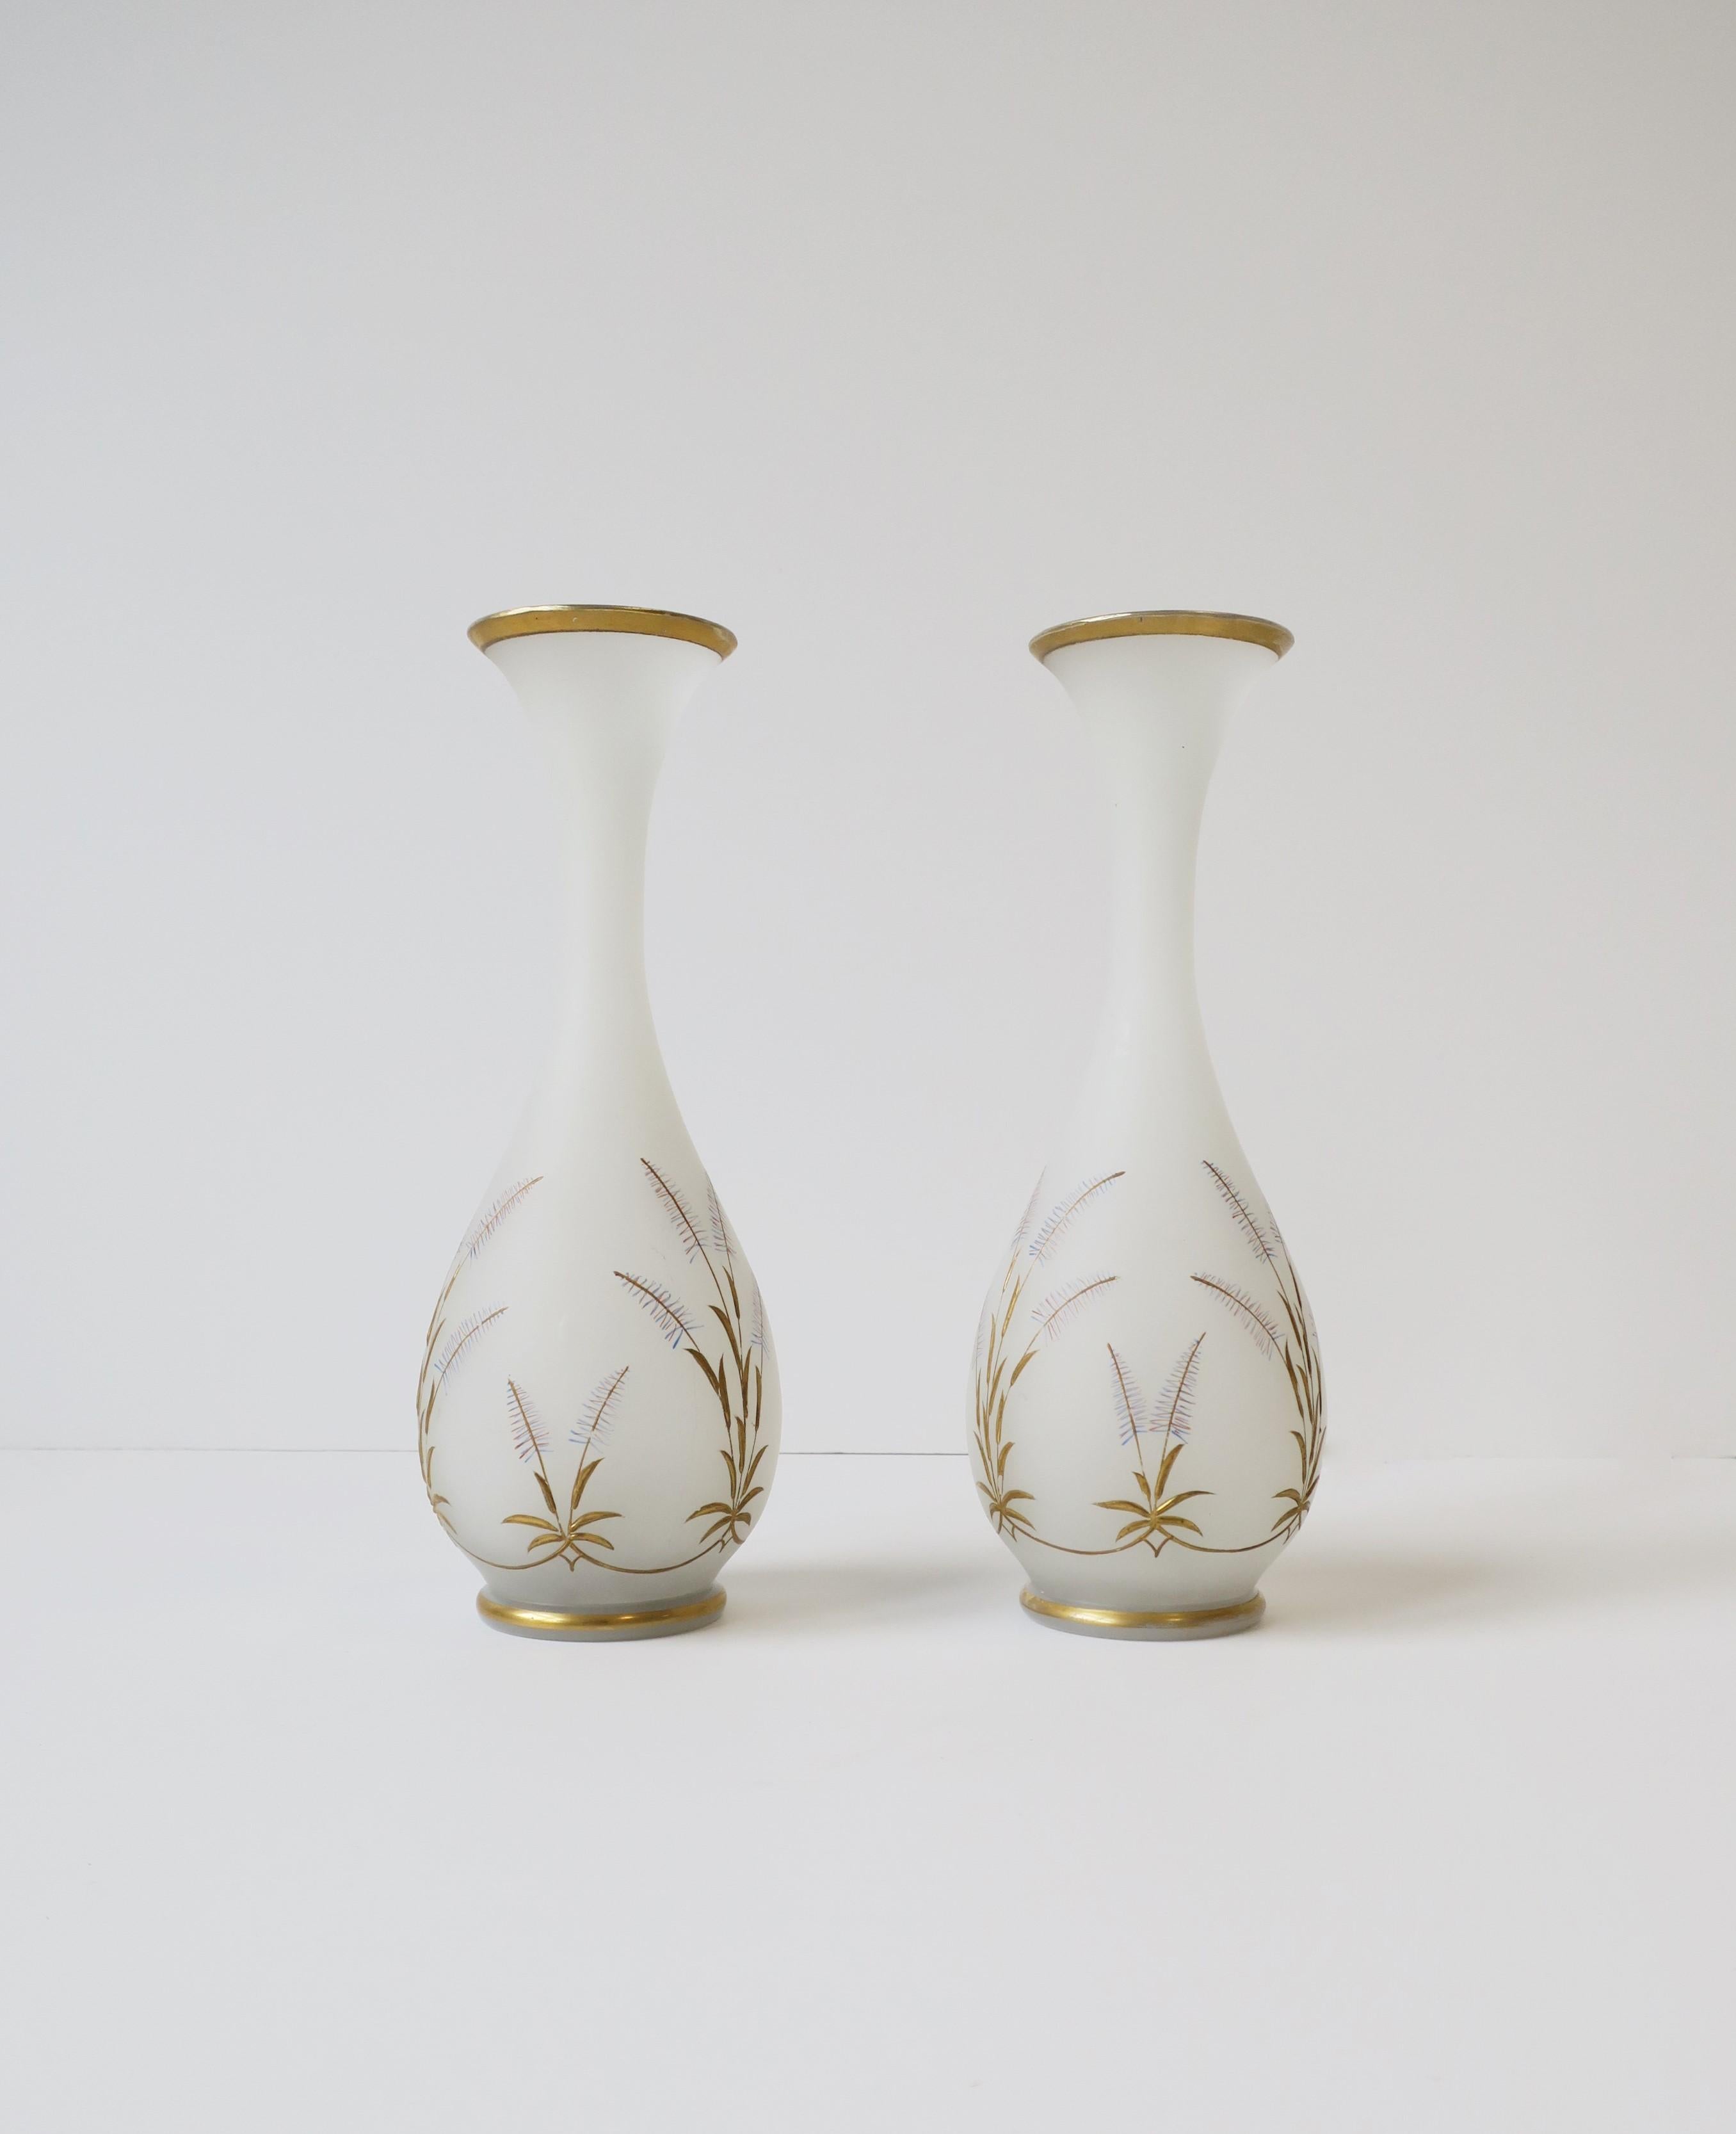 Italian White Opaline and Gold Art Glass Vases with Sheef-of-Wheat Design, Pair 1